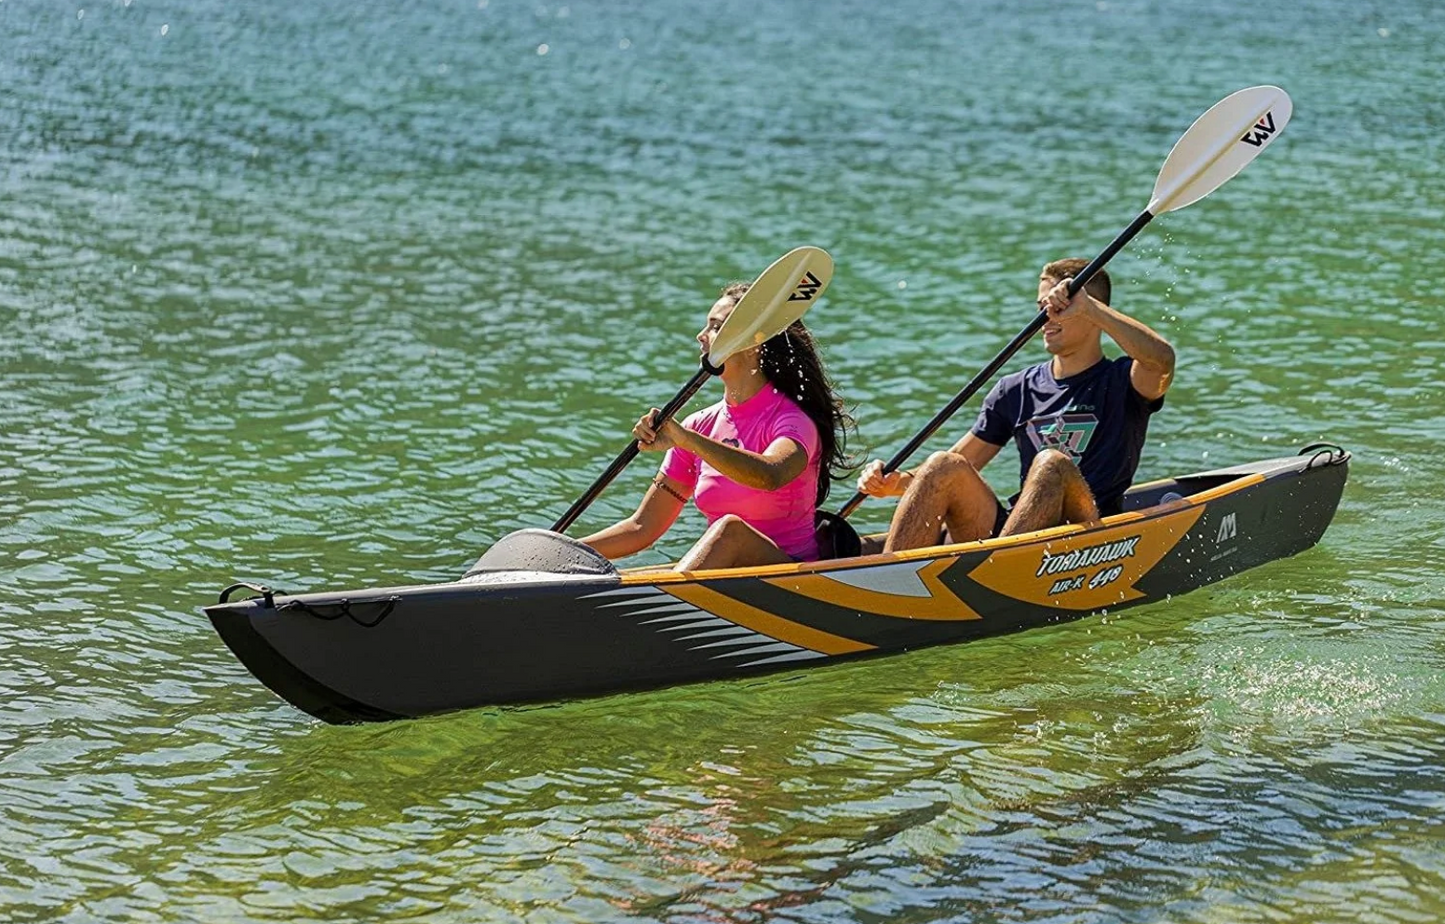 Tomahawk-440 14'5" High pressure Speed Kayak 2 person without paddle